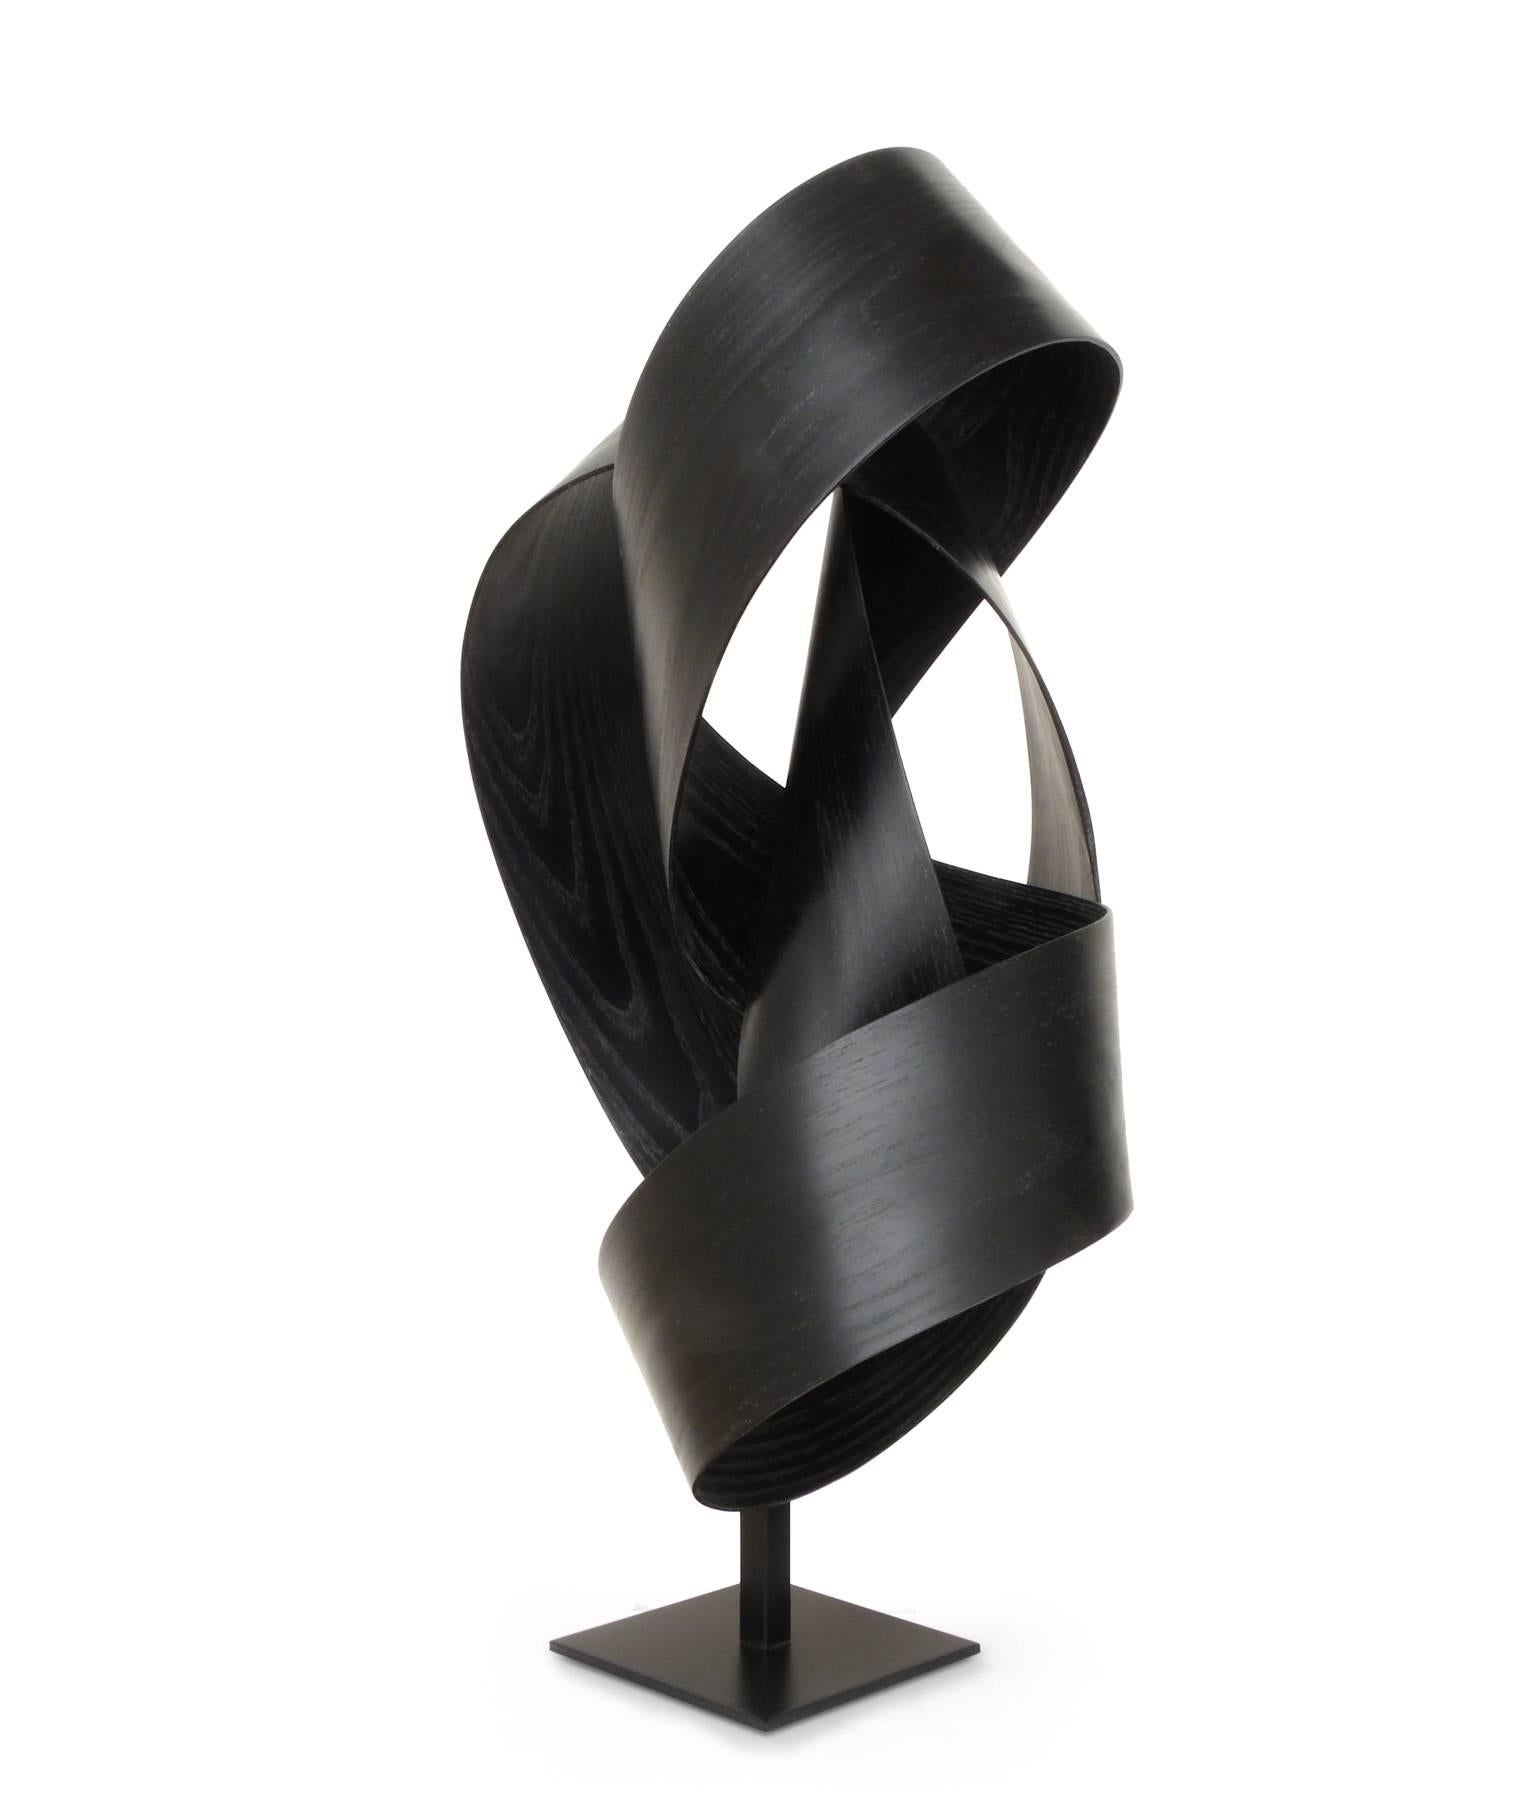 Jeremy Holmes Abstract Sculpture - Atmosphere #248 (black bentwood sculpture)